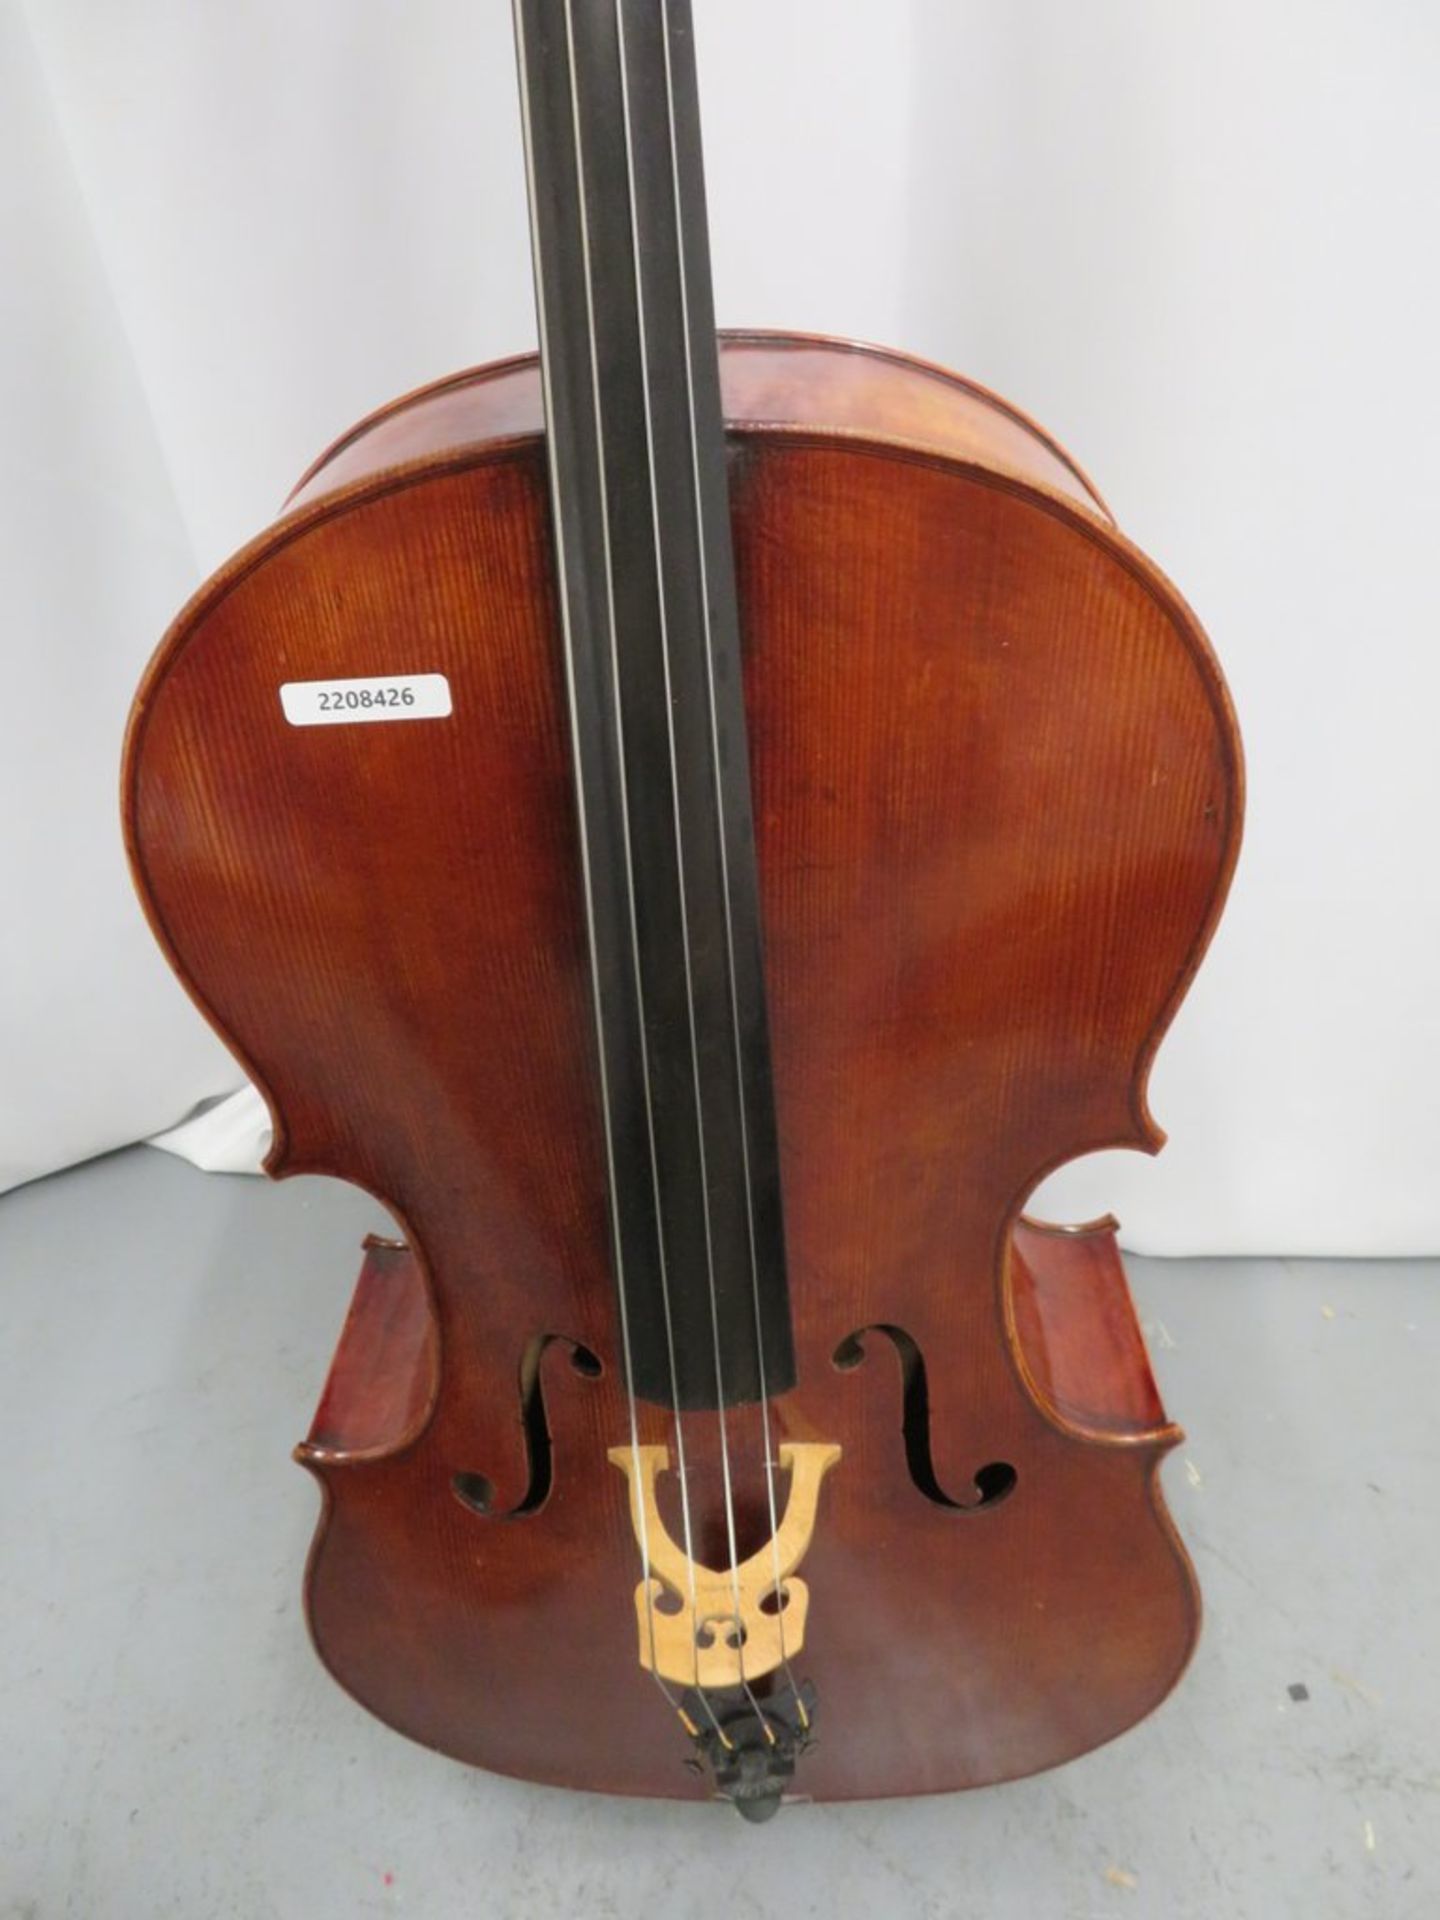 Warrick - Tony Paddy 4/4 Cello. Serial Number: RA-Co 003. C1975. Approximately 48"" Full L - Image 6 of 13